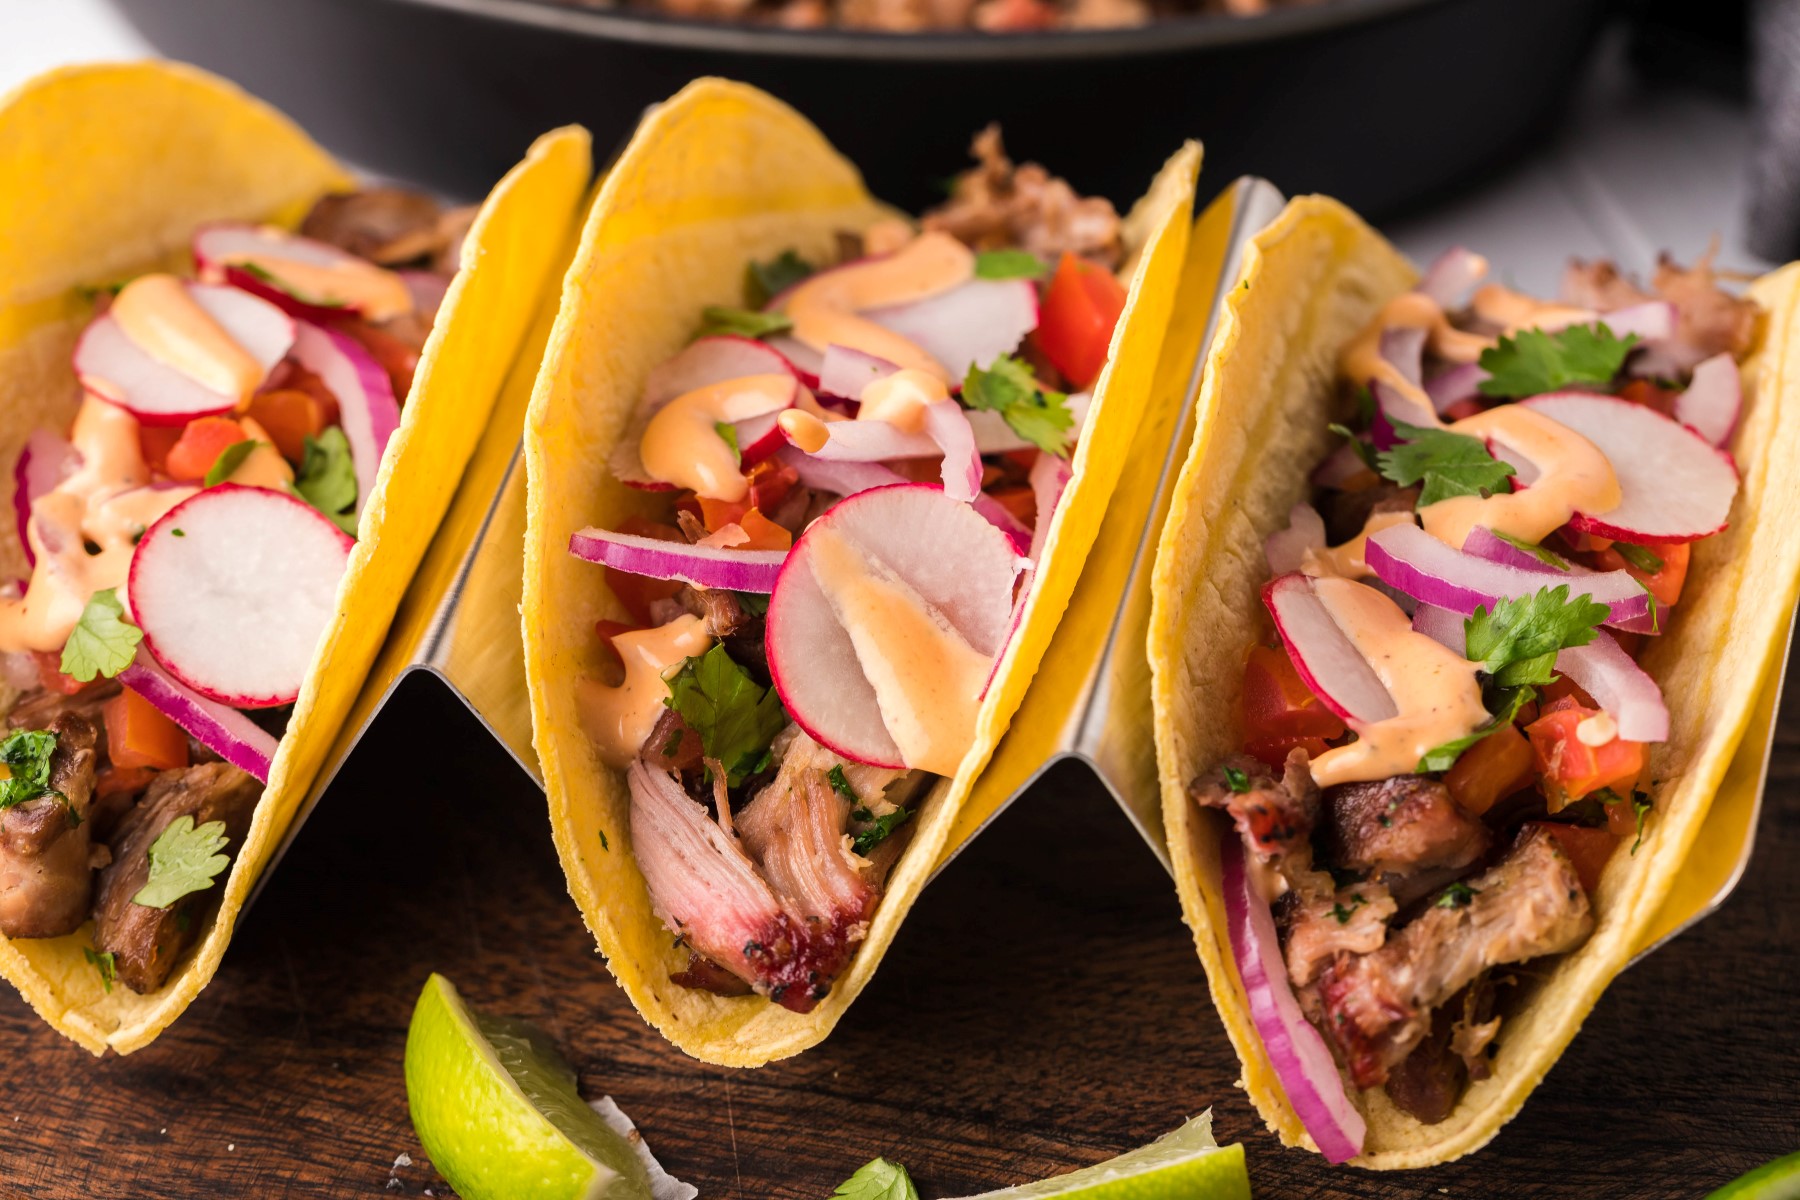 Smoked pork carnitas in soft corn tortillas filled with smoked pork, topped with red onions, sliced radishes, cilantro and spicy mayo.